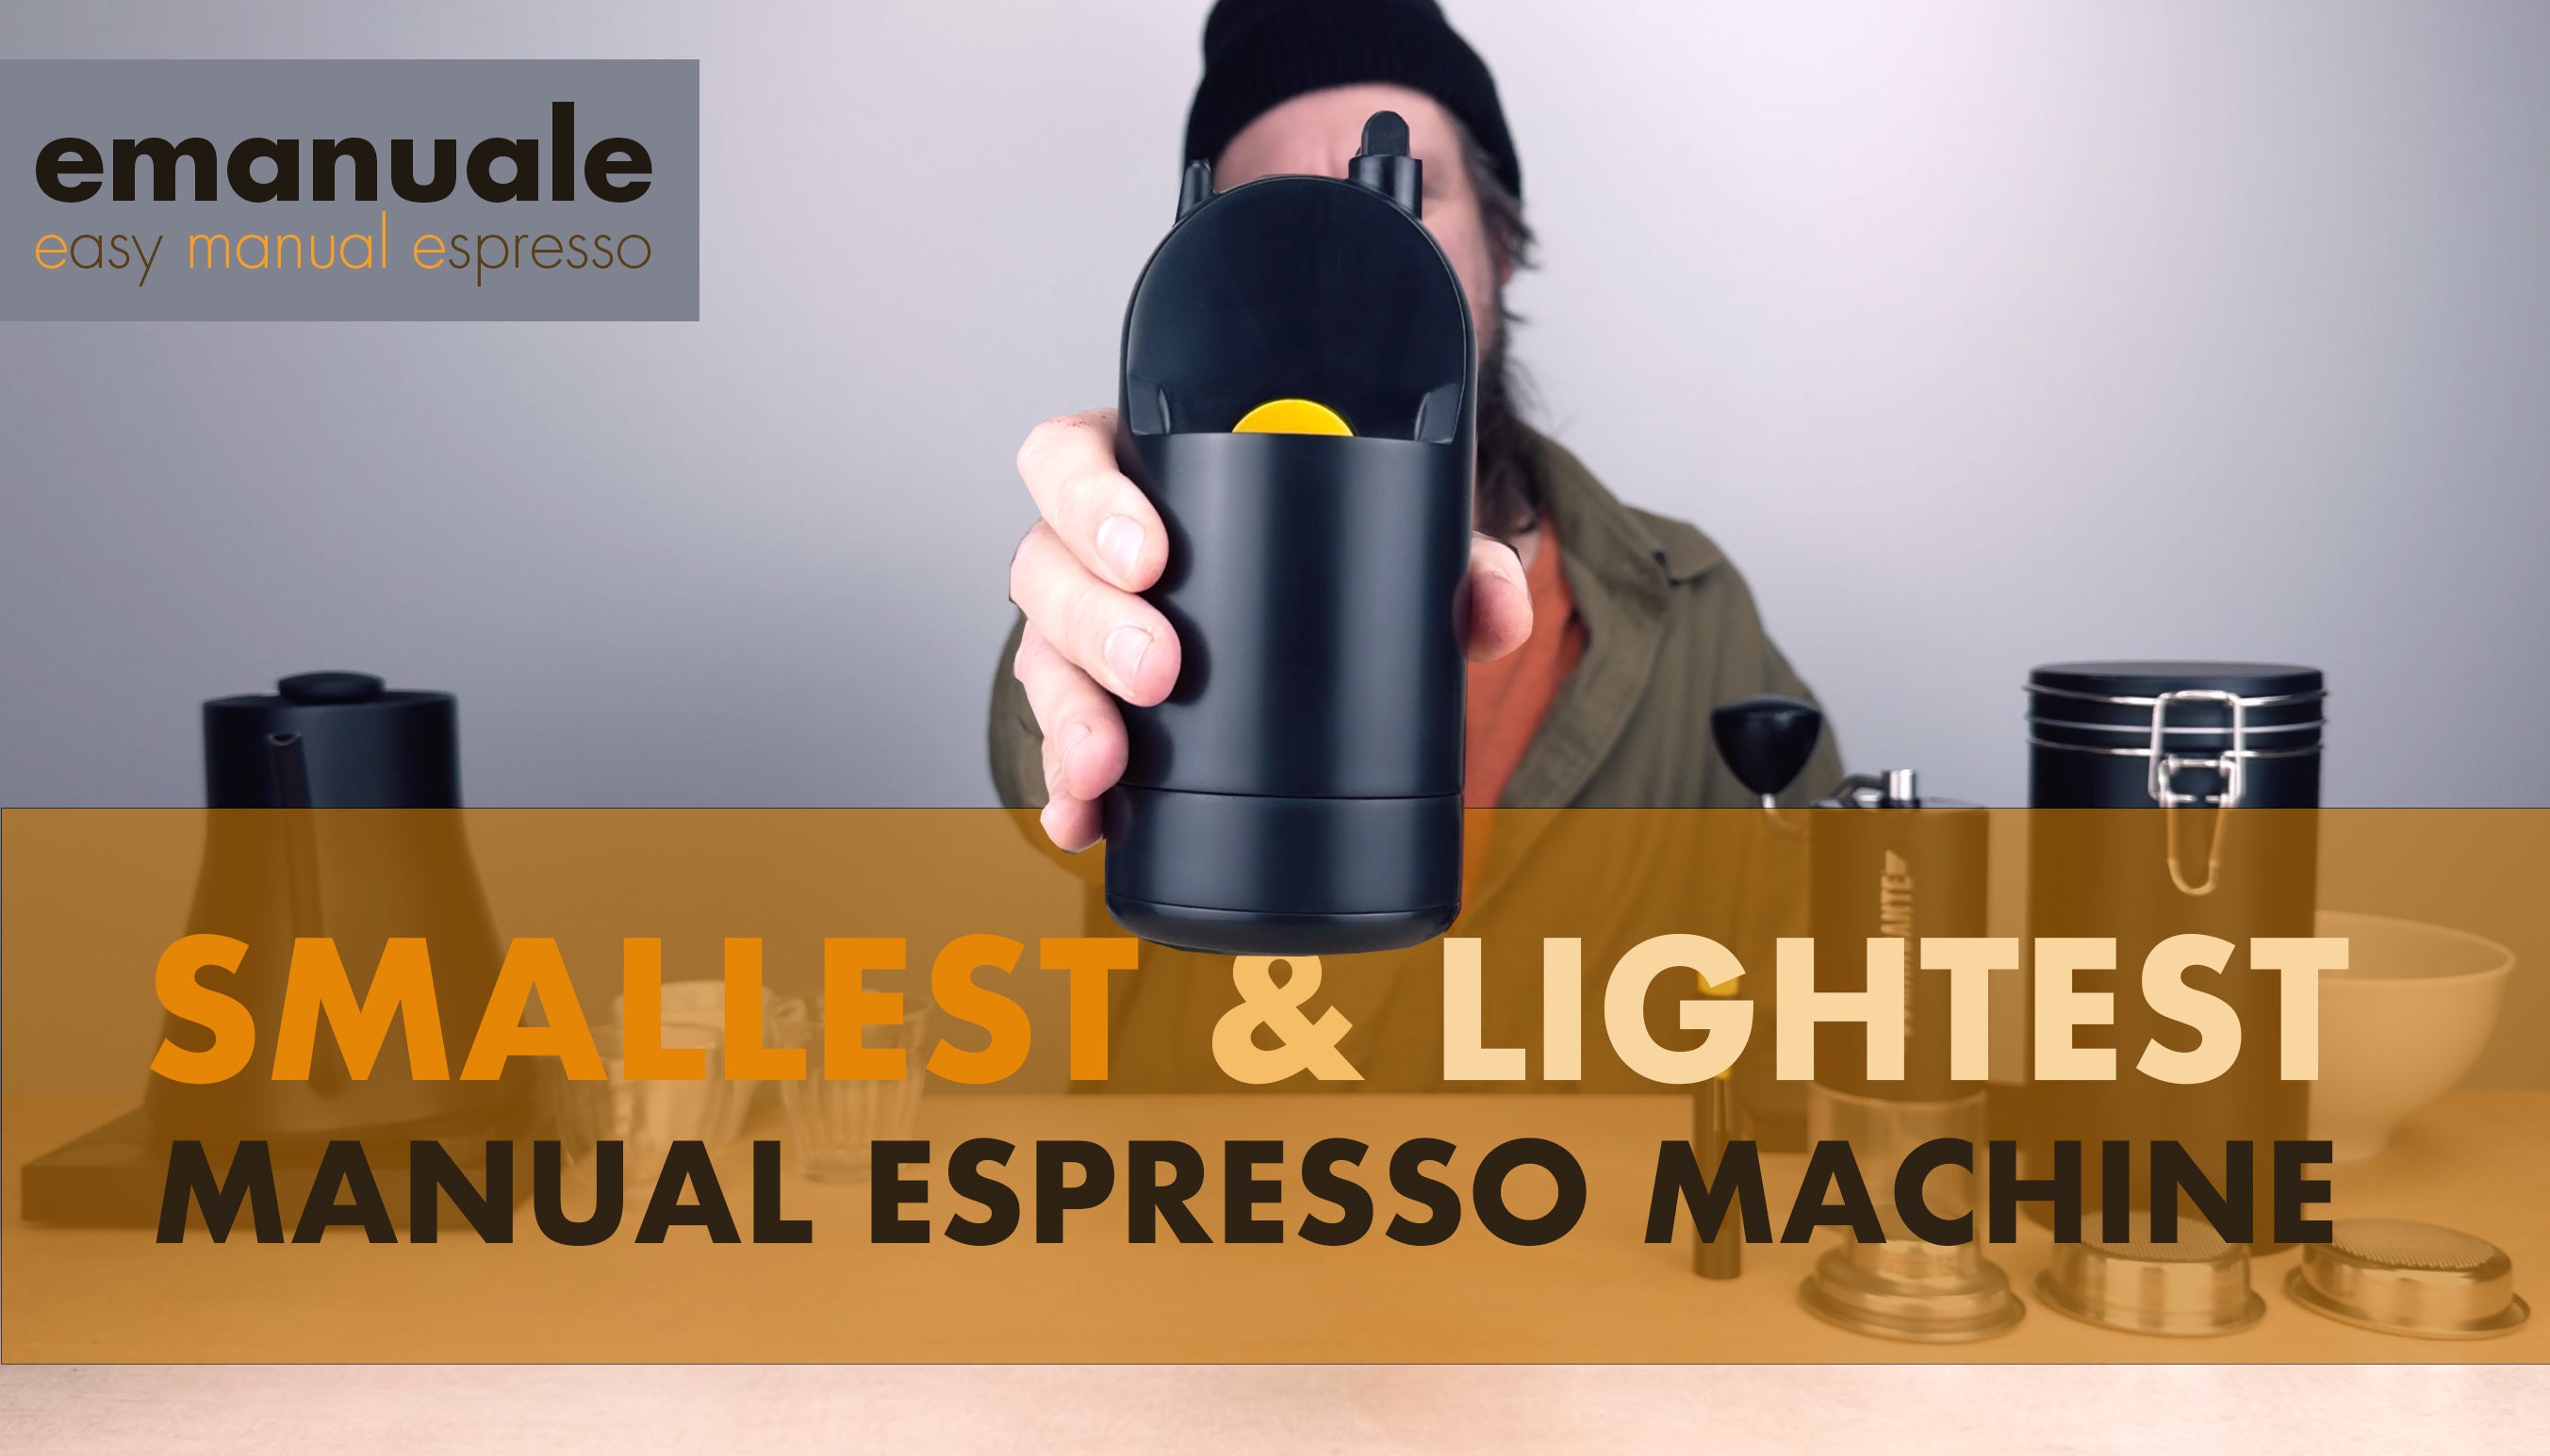 Load video: video about emanuale, the smallest &amp; lightest manual espresso machine